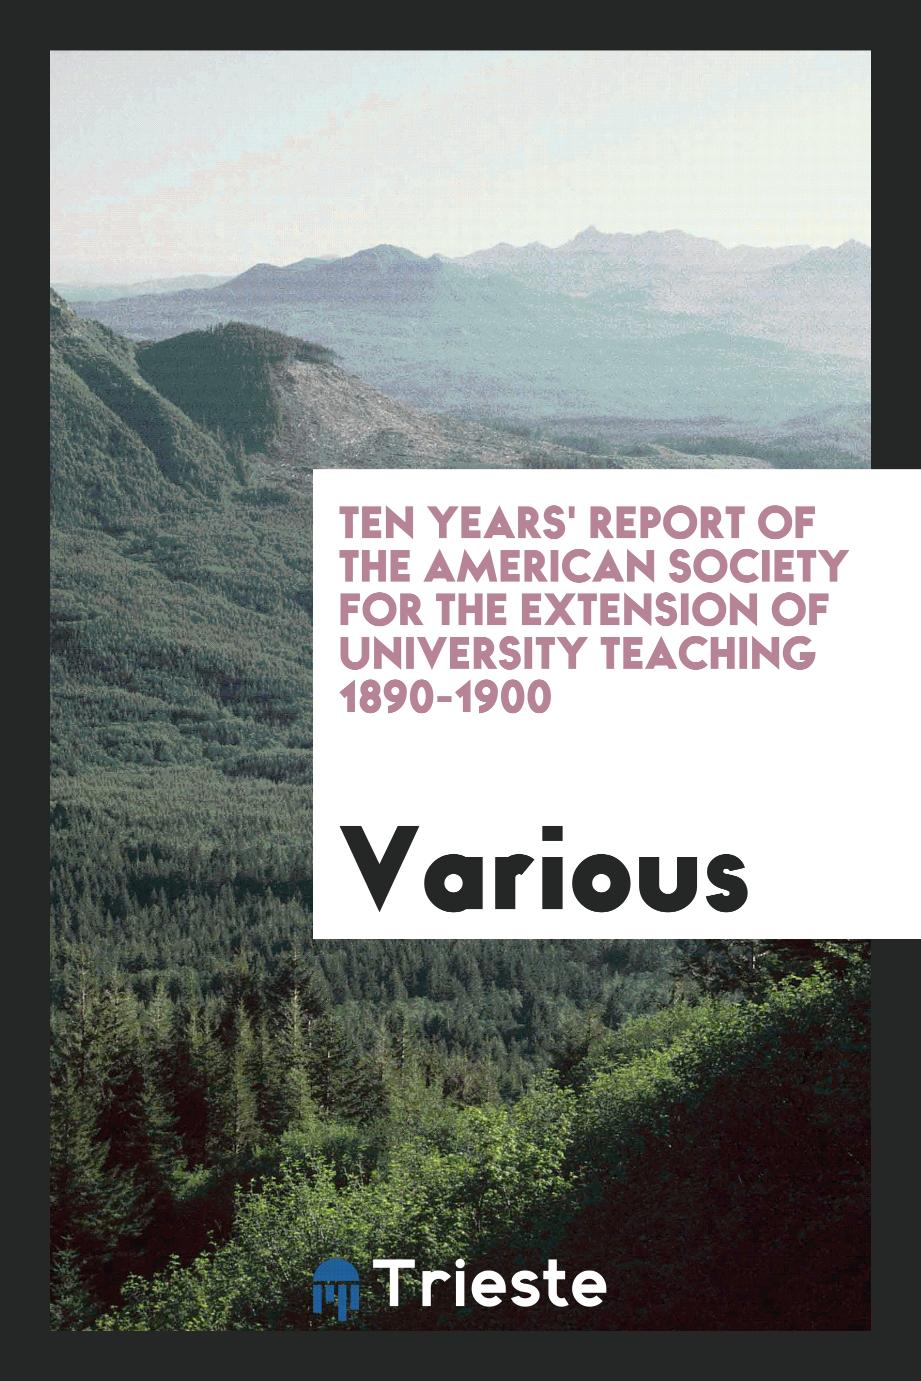 Ten Years' Report of the American Society for the Extension of University Teaching 1890-1900